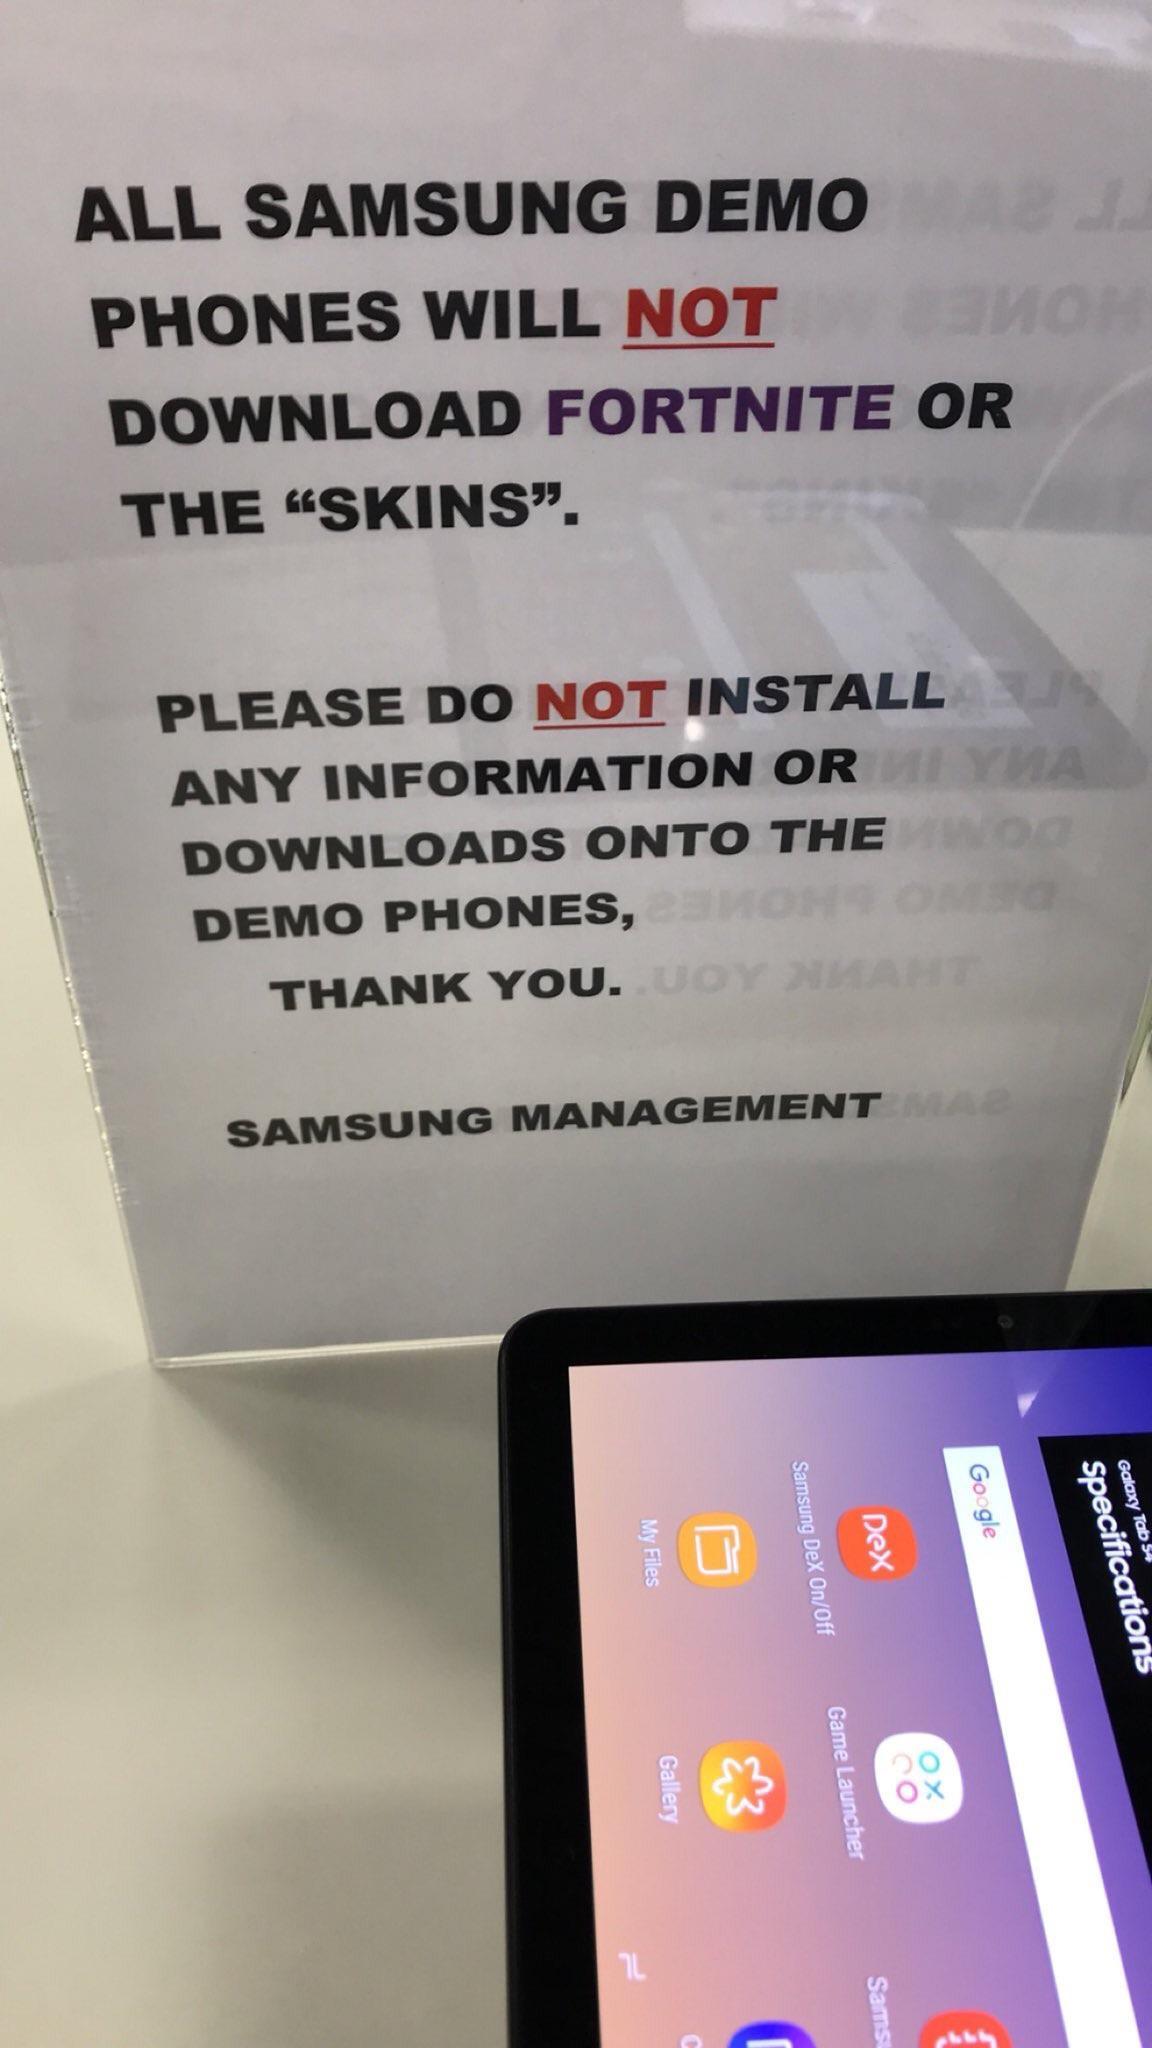 Fortnite fans are stealing the Galaxy skin from Note 9 demo units, and Samsung is not impressed